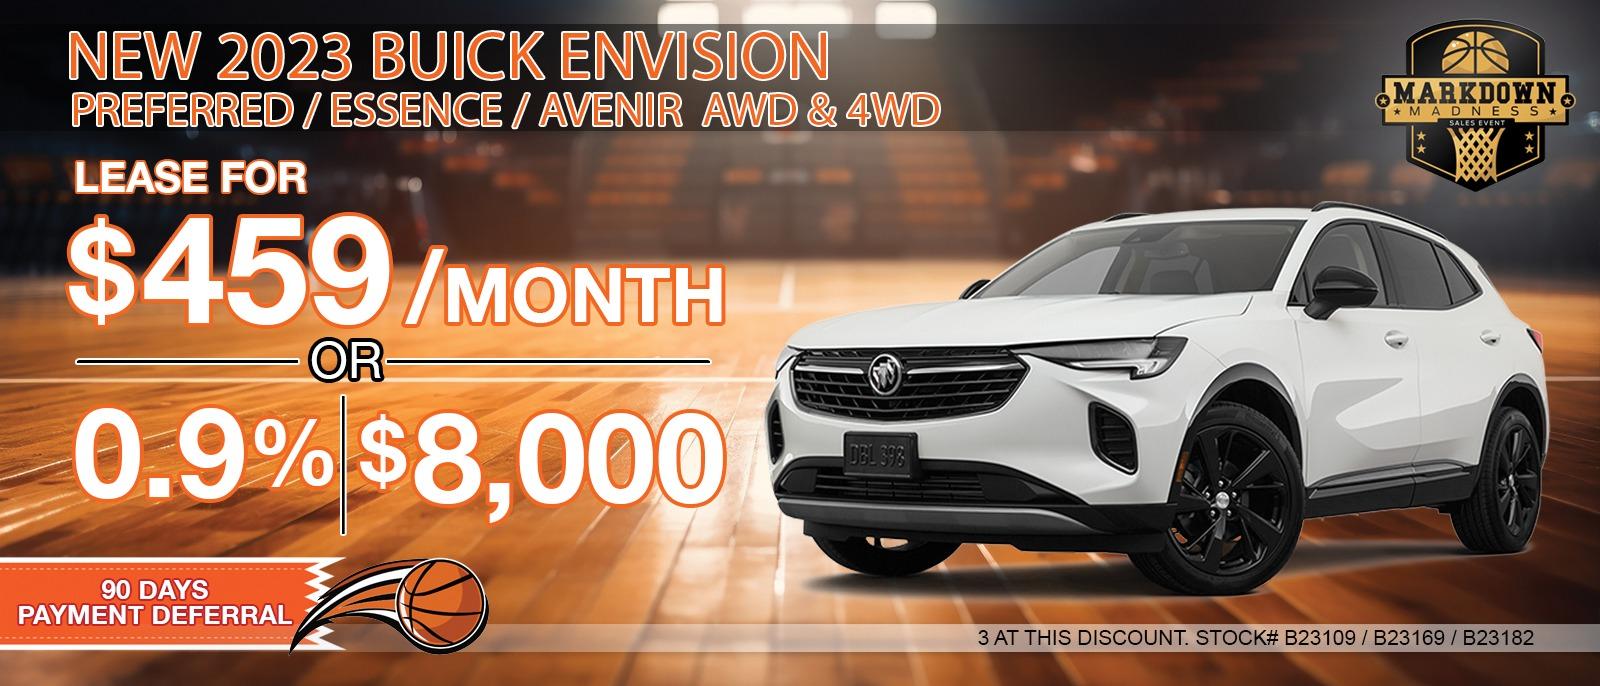 2023 BUICK ENVISION | PREFFERED/ESSENCE | 2WD & 4WD. Your Net Savings Up To $8,000 Off MSRP After All Offers.